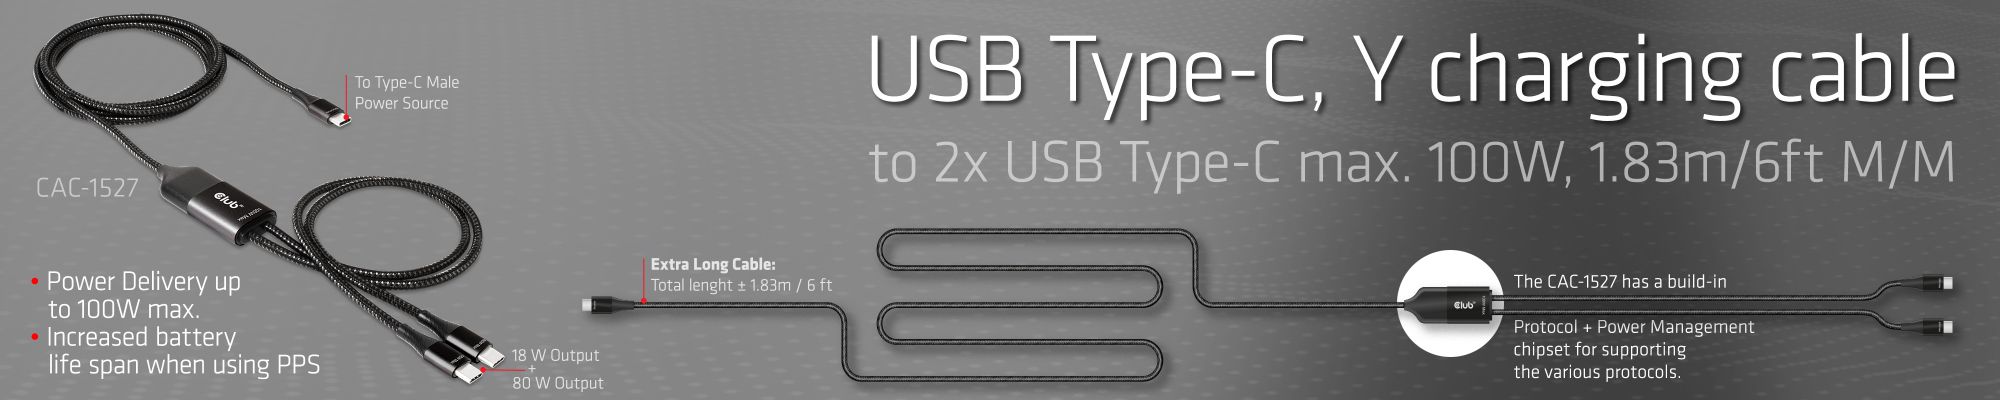 USB Type-C, Y charging cable to 2x USB Type-C max. 100W, 1.83m/6ft M/M